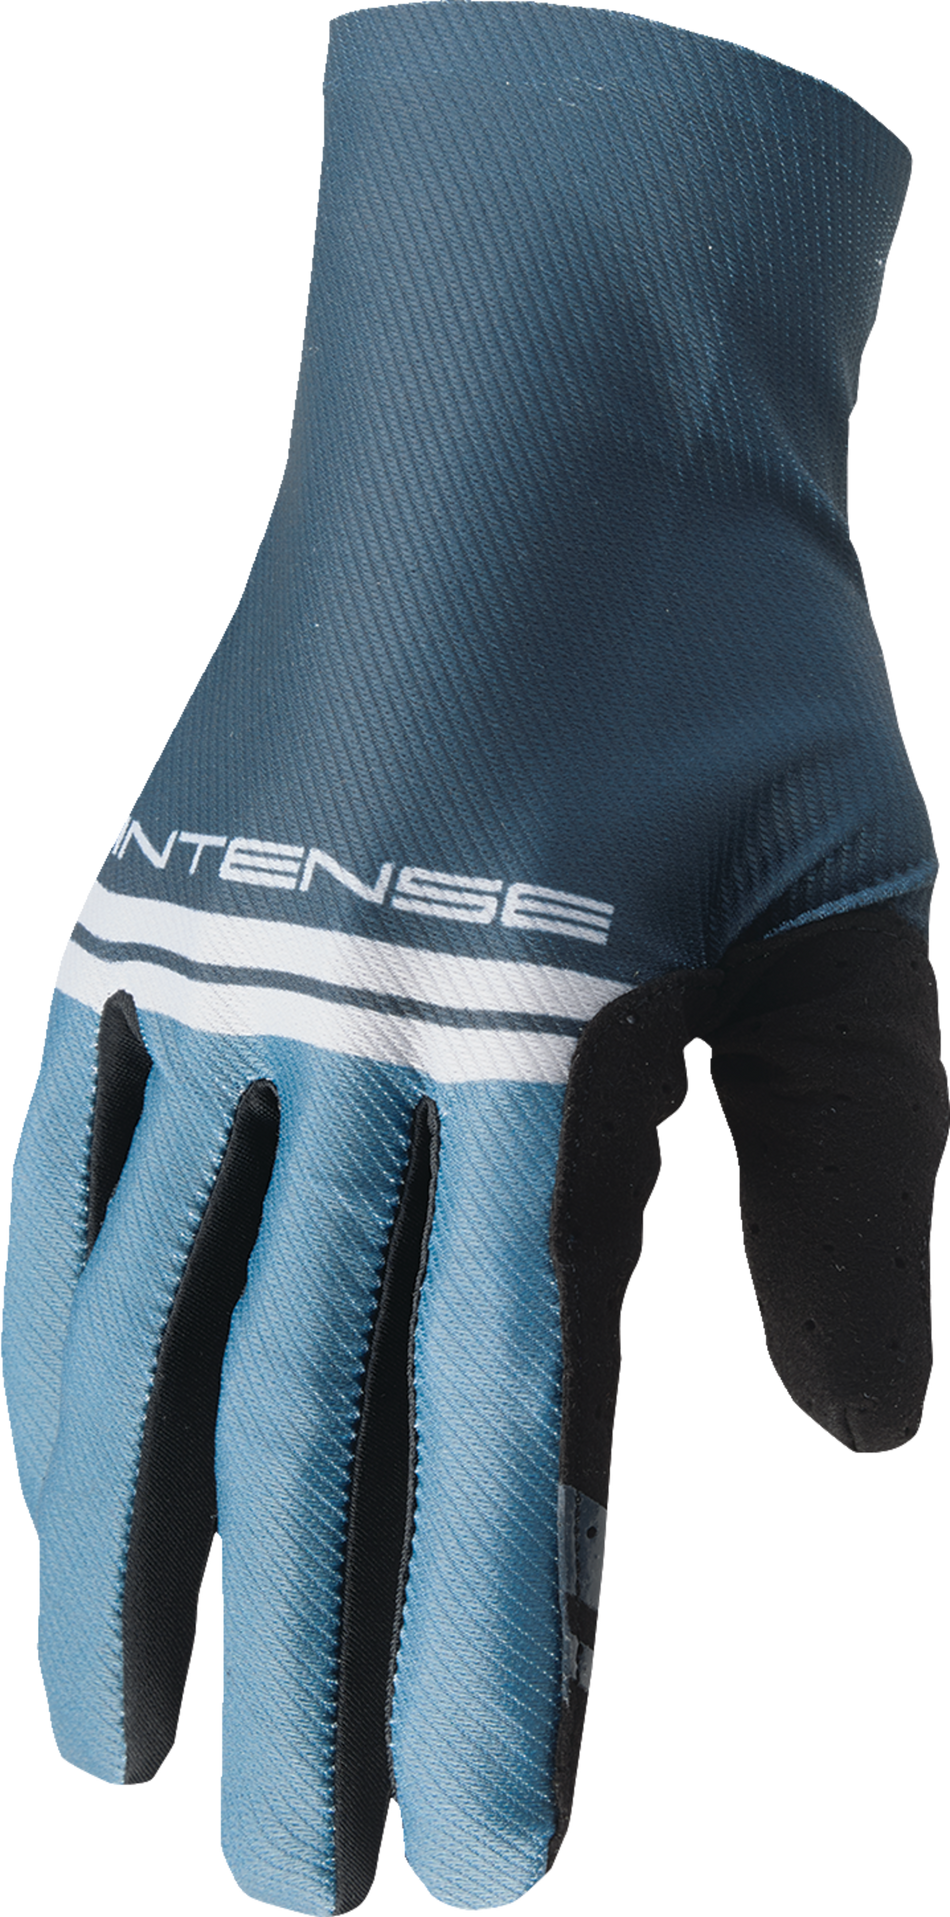 THOR Intense Assist Censis Gloves - Teal/Midnight - Large 3360-0238